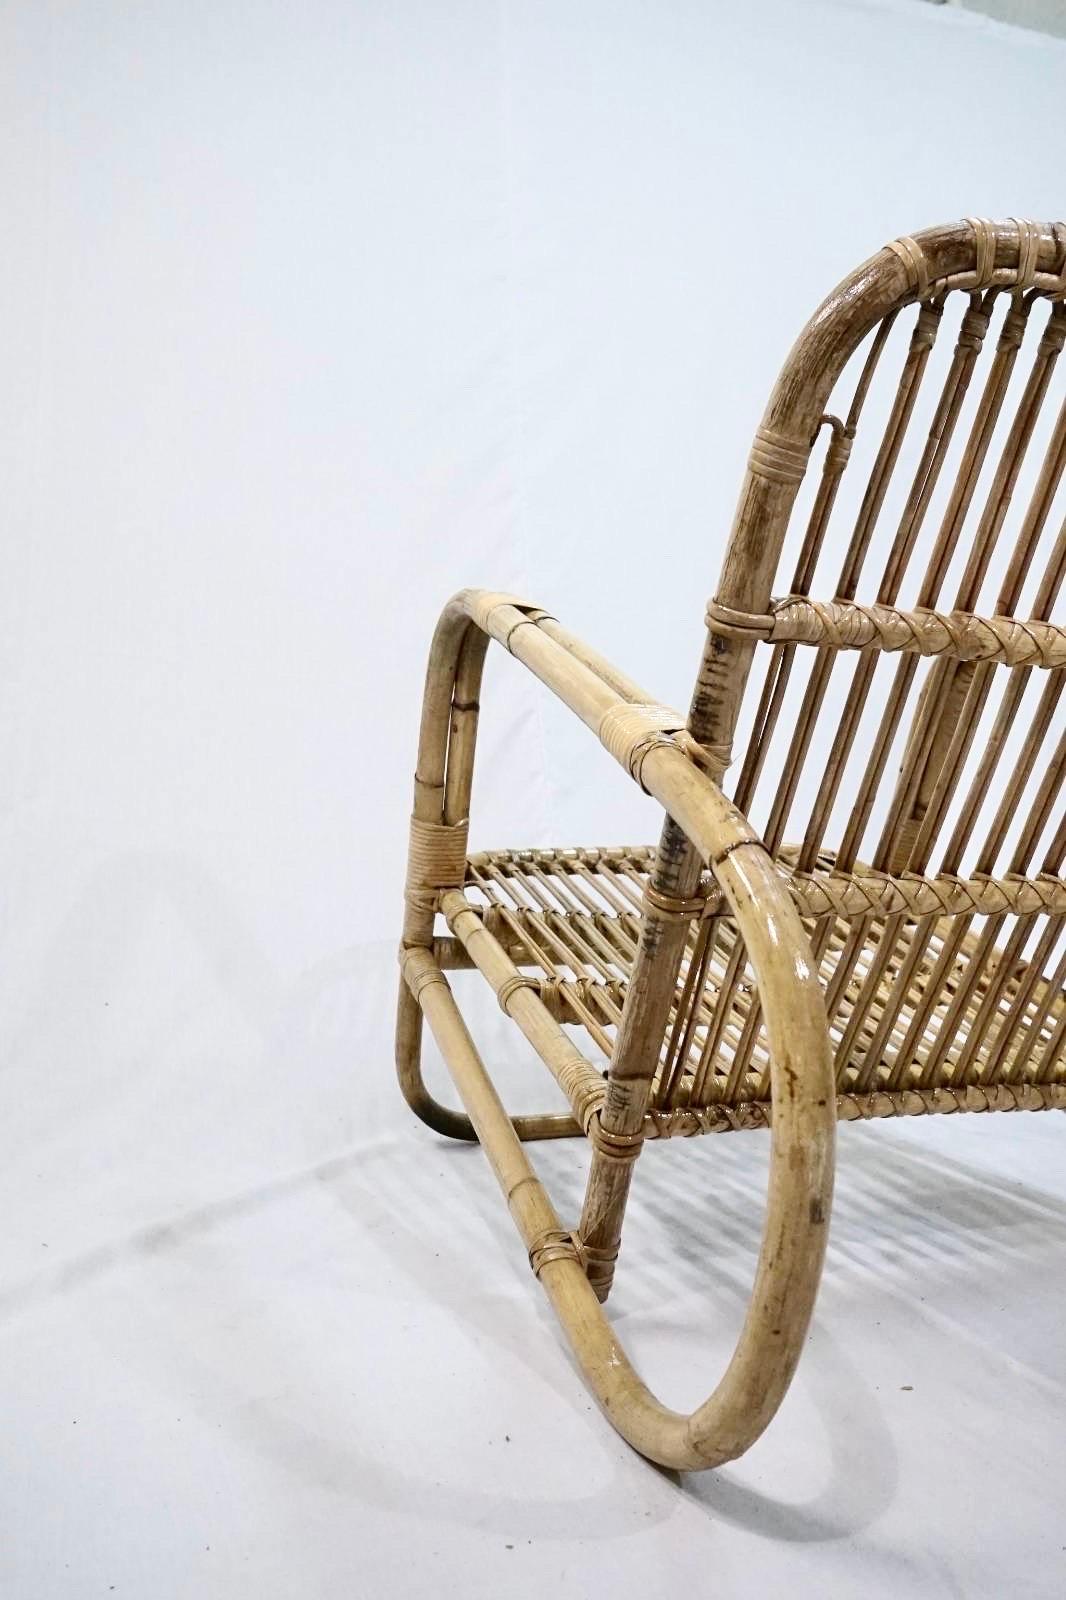 Rare and important Flemming Lassen rattan easychair manufactured by E.V.A Nissen 1940.

Flemming Lassen was a danish architect who played a big role in the early modernist movement, Flemming Lassen and his brother Mogens Lassen and their childhood